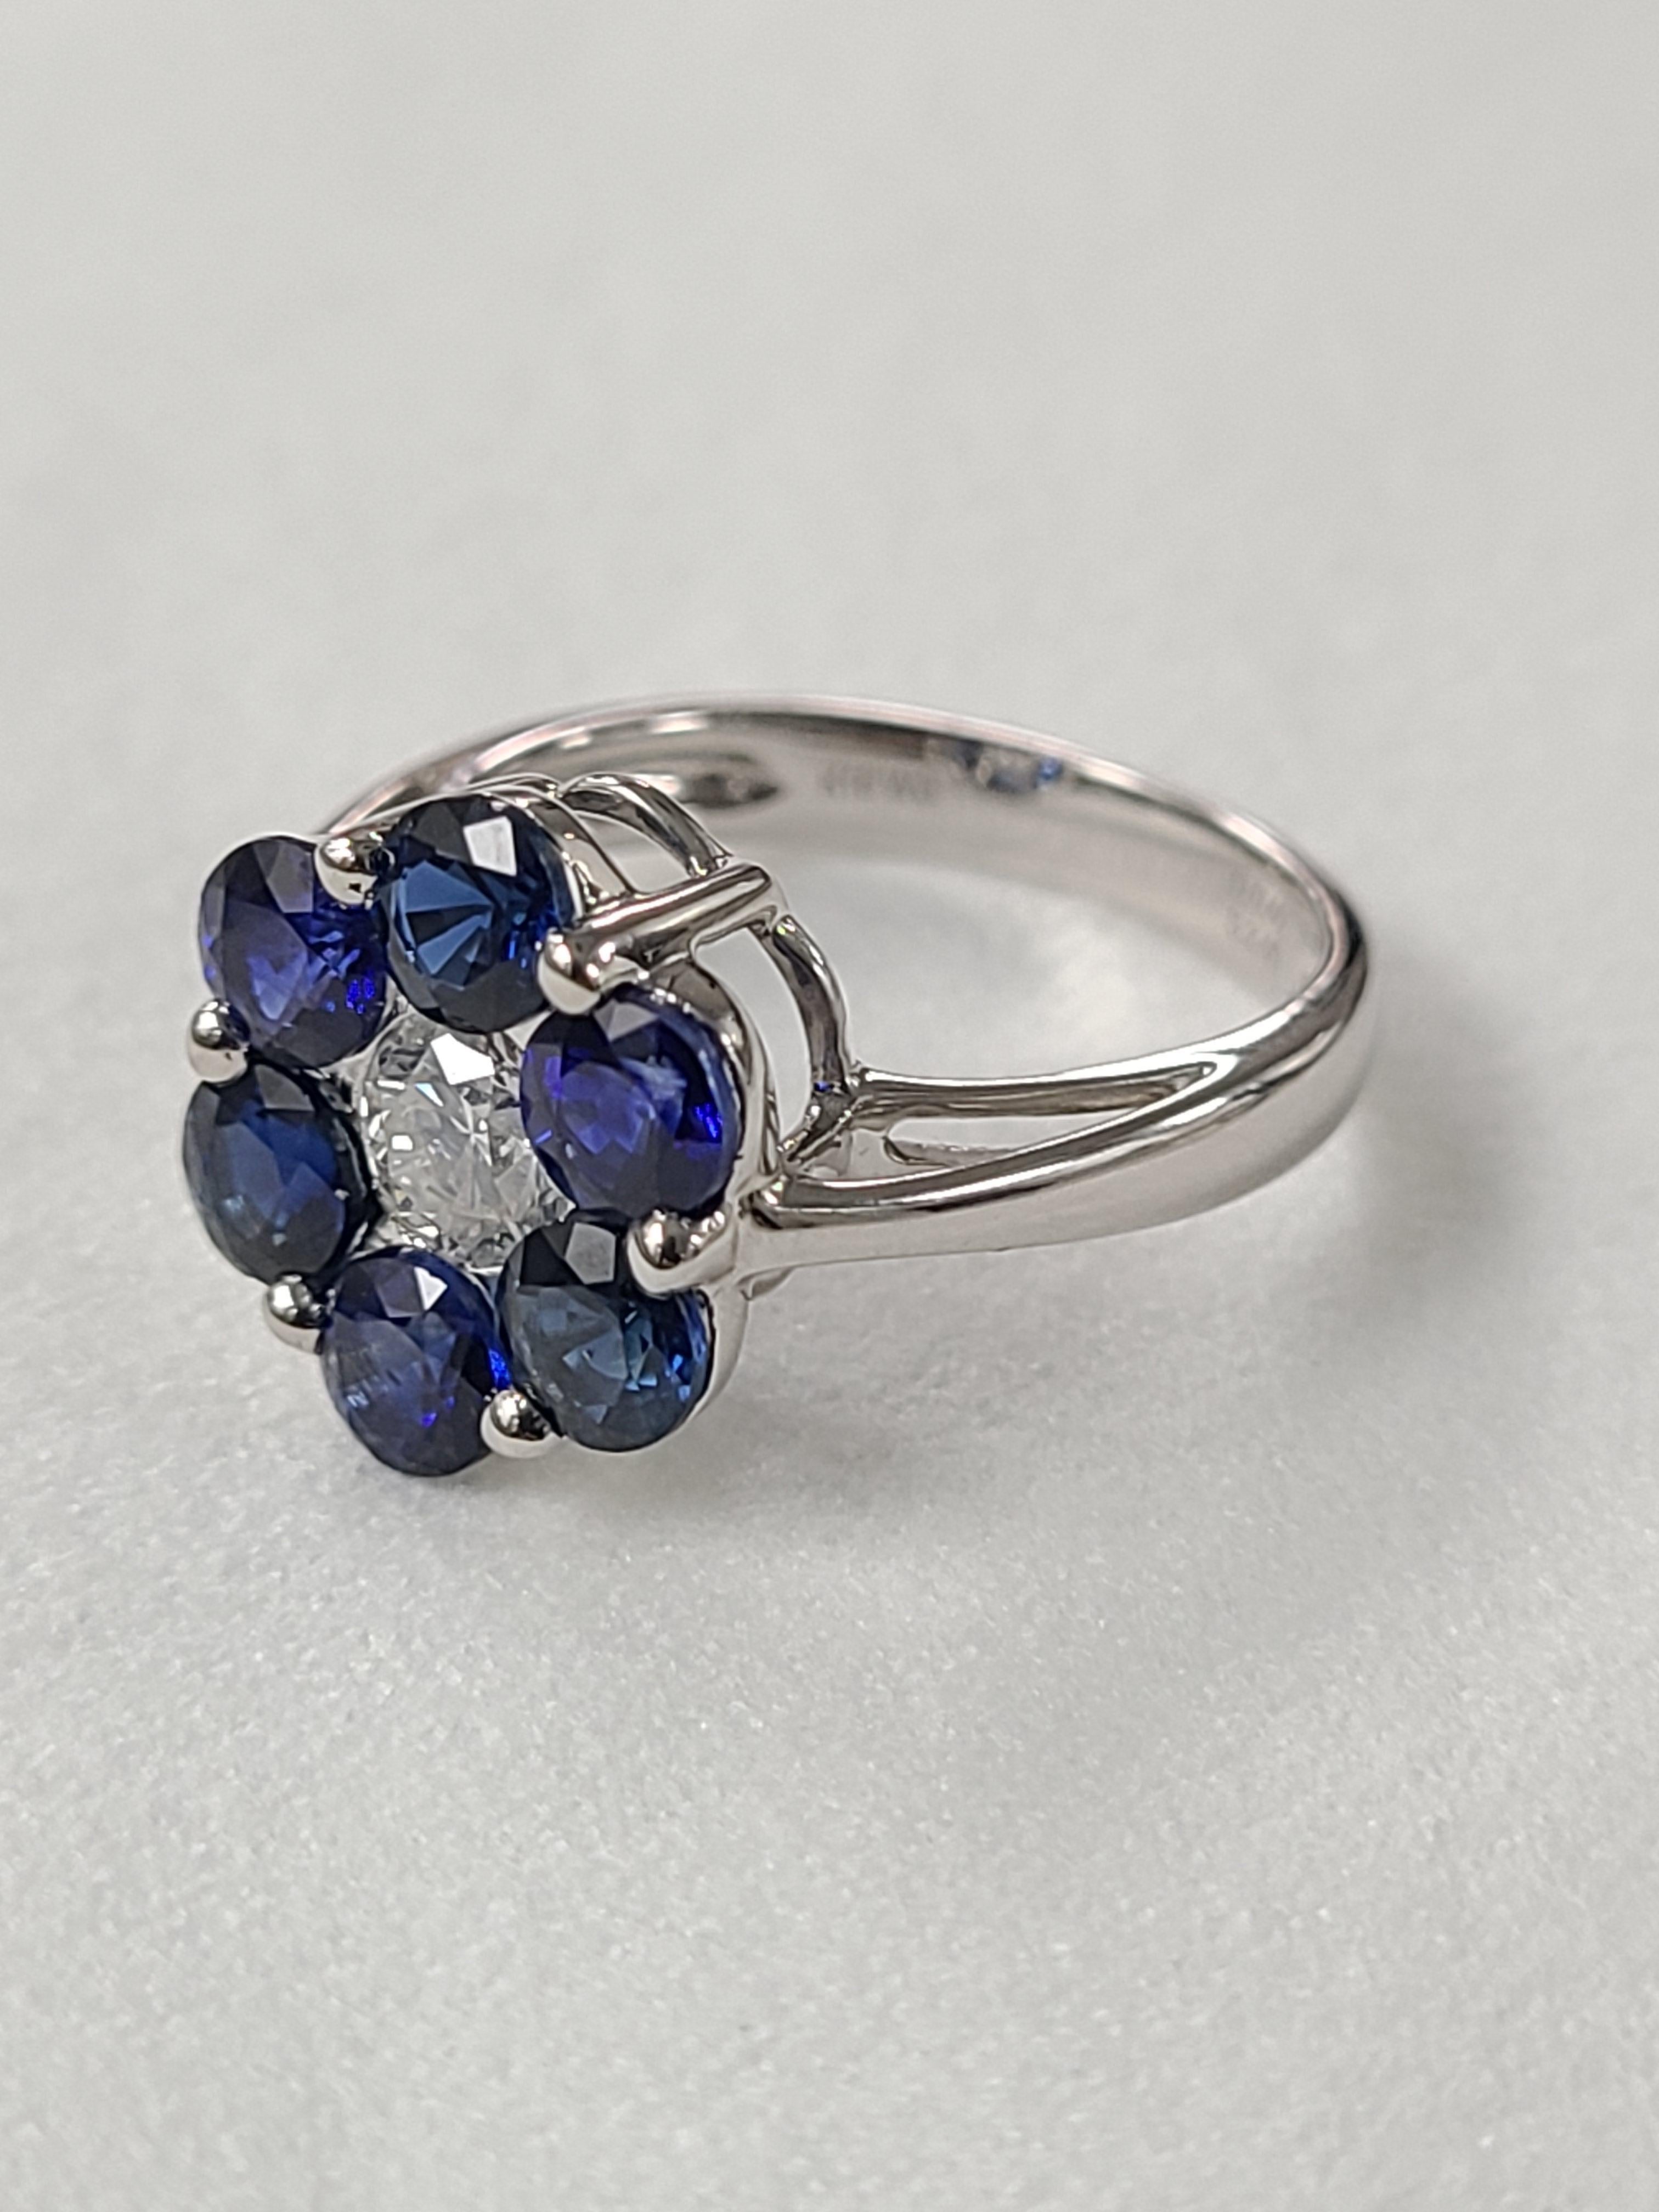 A Gorgeous blue sapphire and diamond engagement ring made in 18k white gold ! the blue sapphire color is royal blue and weight is 2.40 carats , the center diamond is .40 cts . The ring dimensions in cm 1 x 1 x 2.3 (LXWXH). US size 6 1/2.